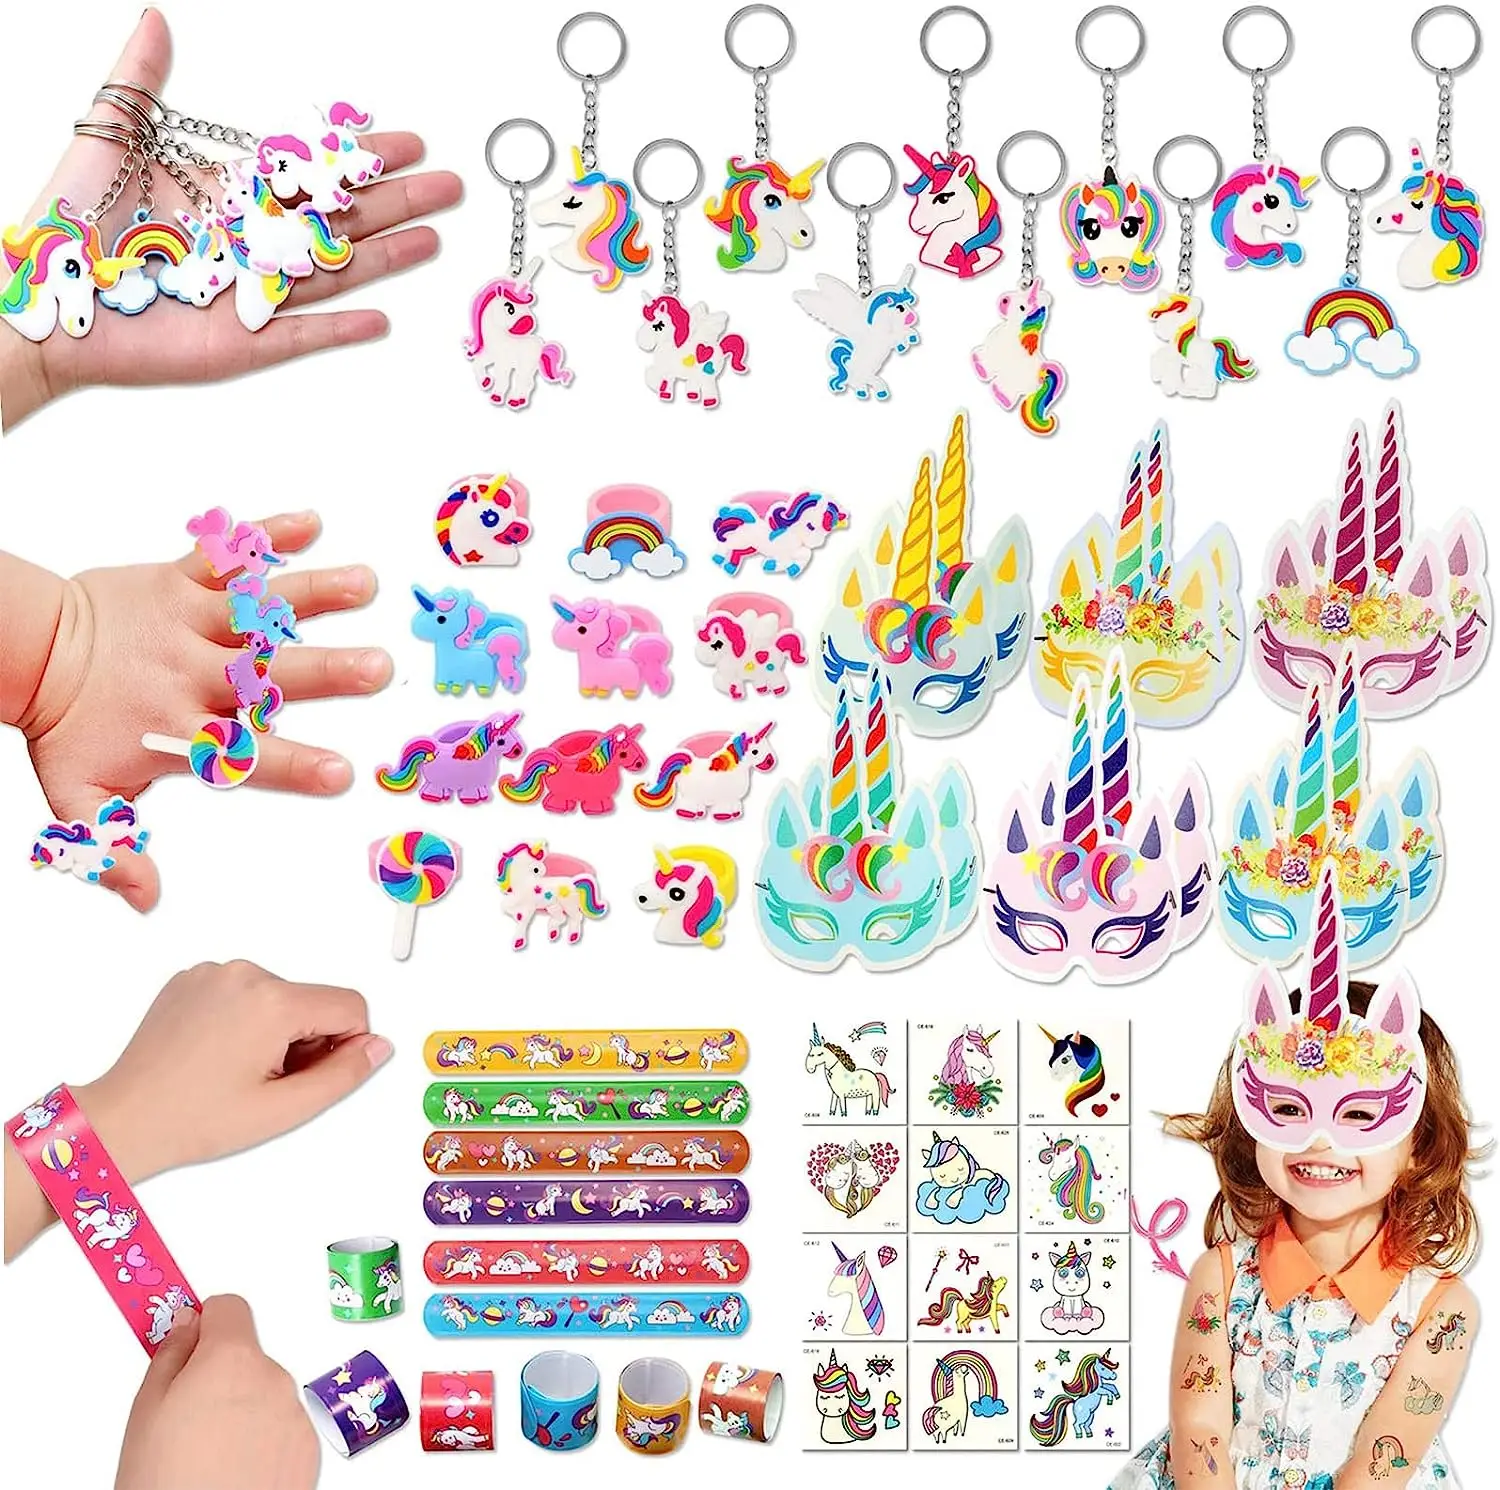 

60pcs Unicorn Birthday Party Favors Supplies Slap Bracelet Mask Ring Keychain Tattoos Rainbow Unicorn Gifts Goodie Bags Fillers